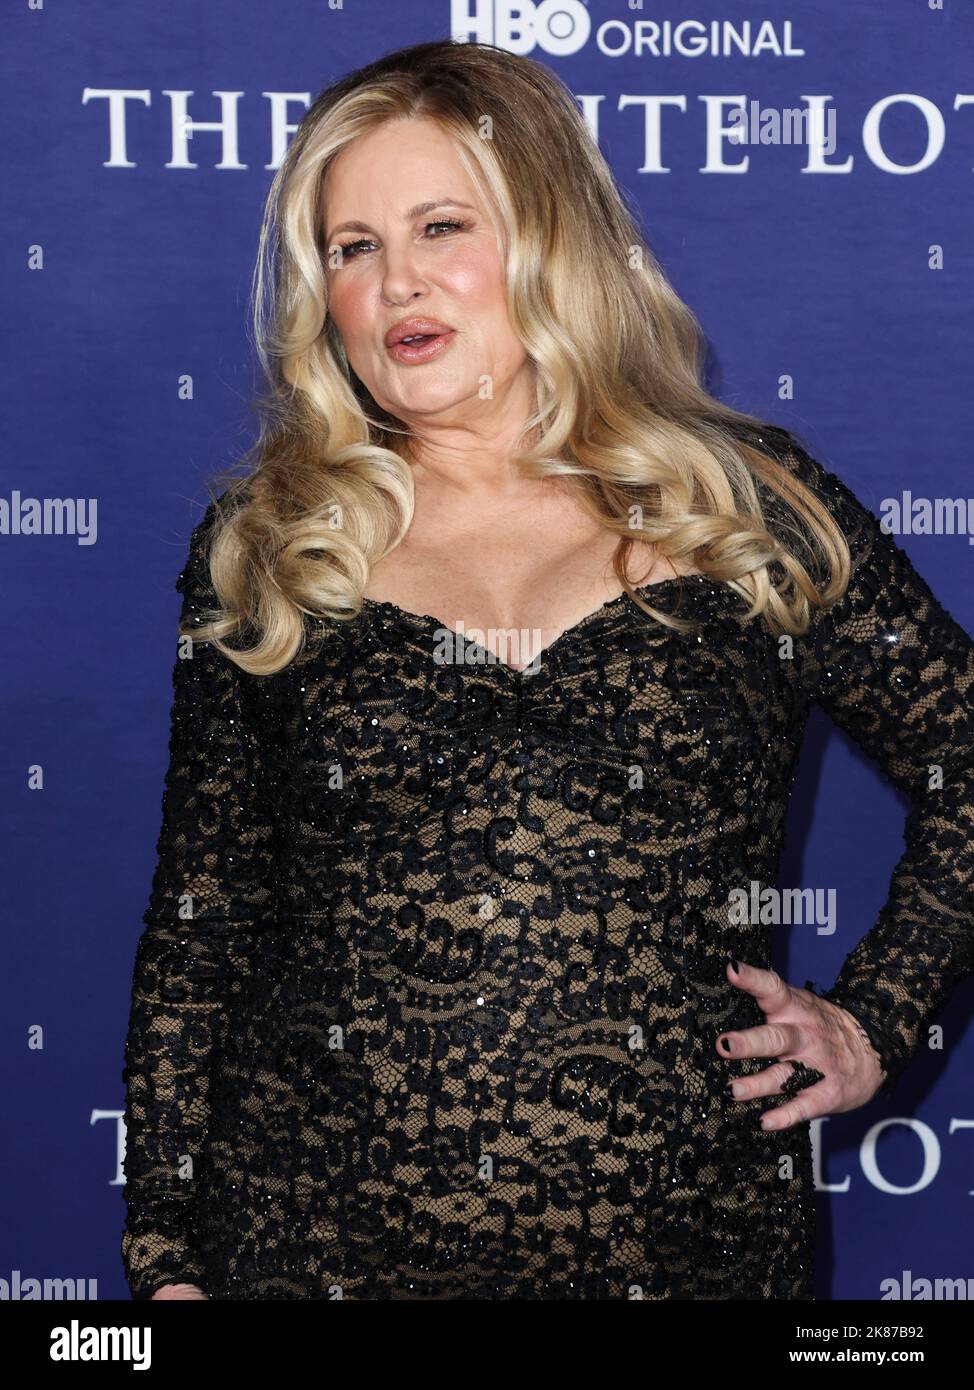 The Raw Triumph of Jennifer Coolidge in “The White Lotus”